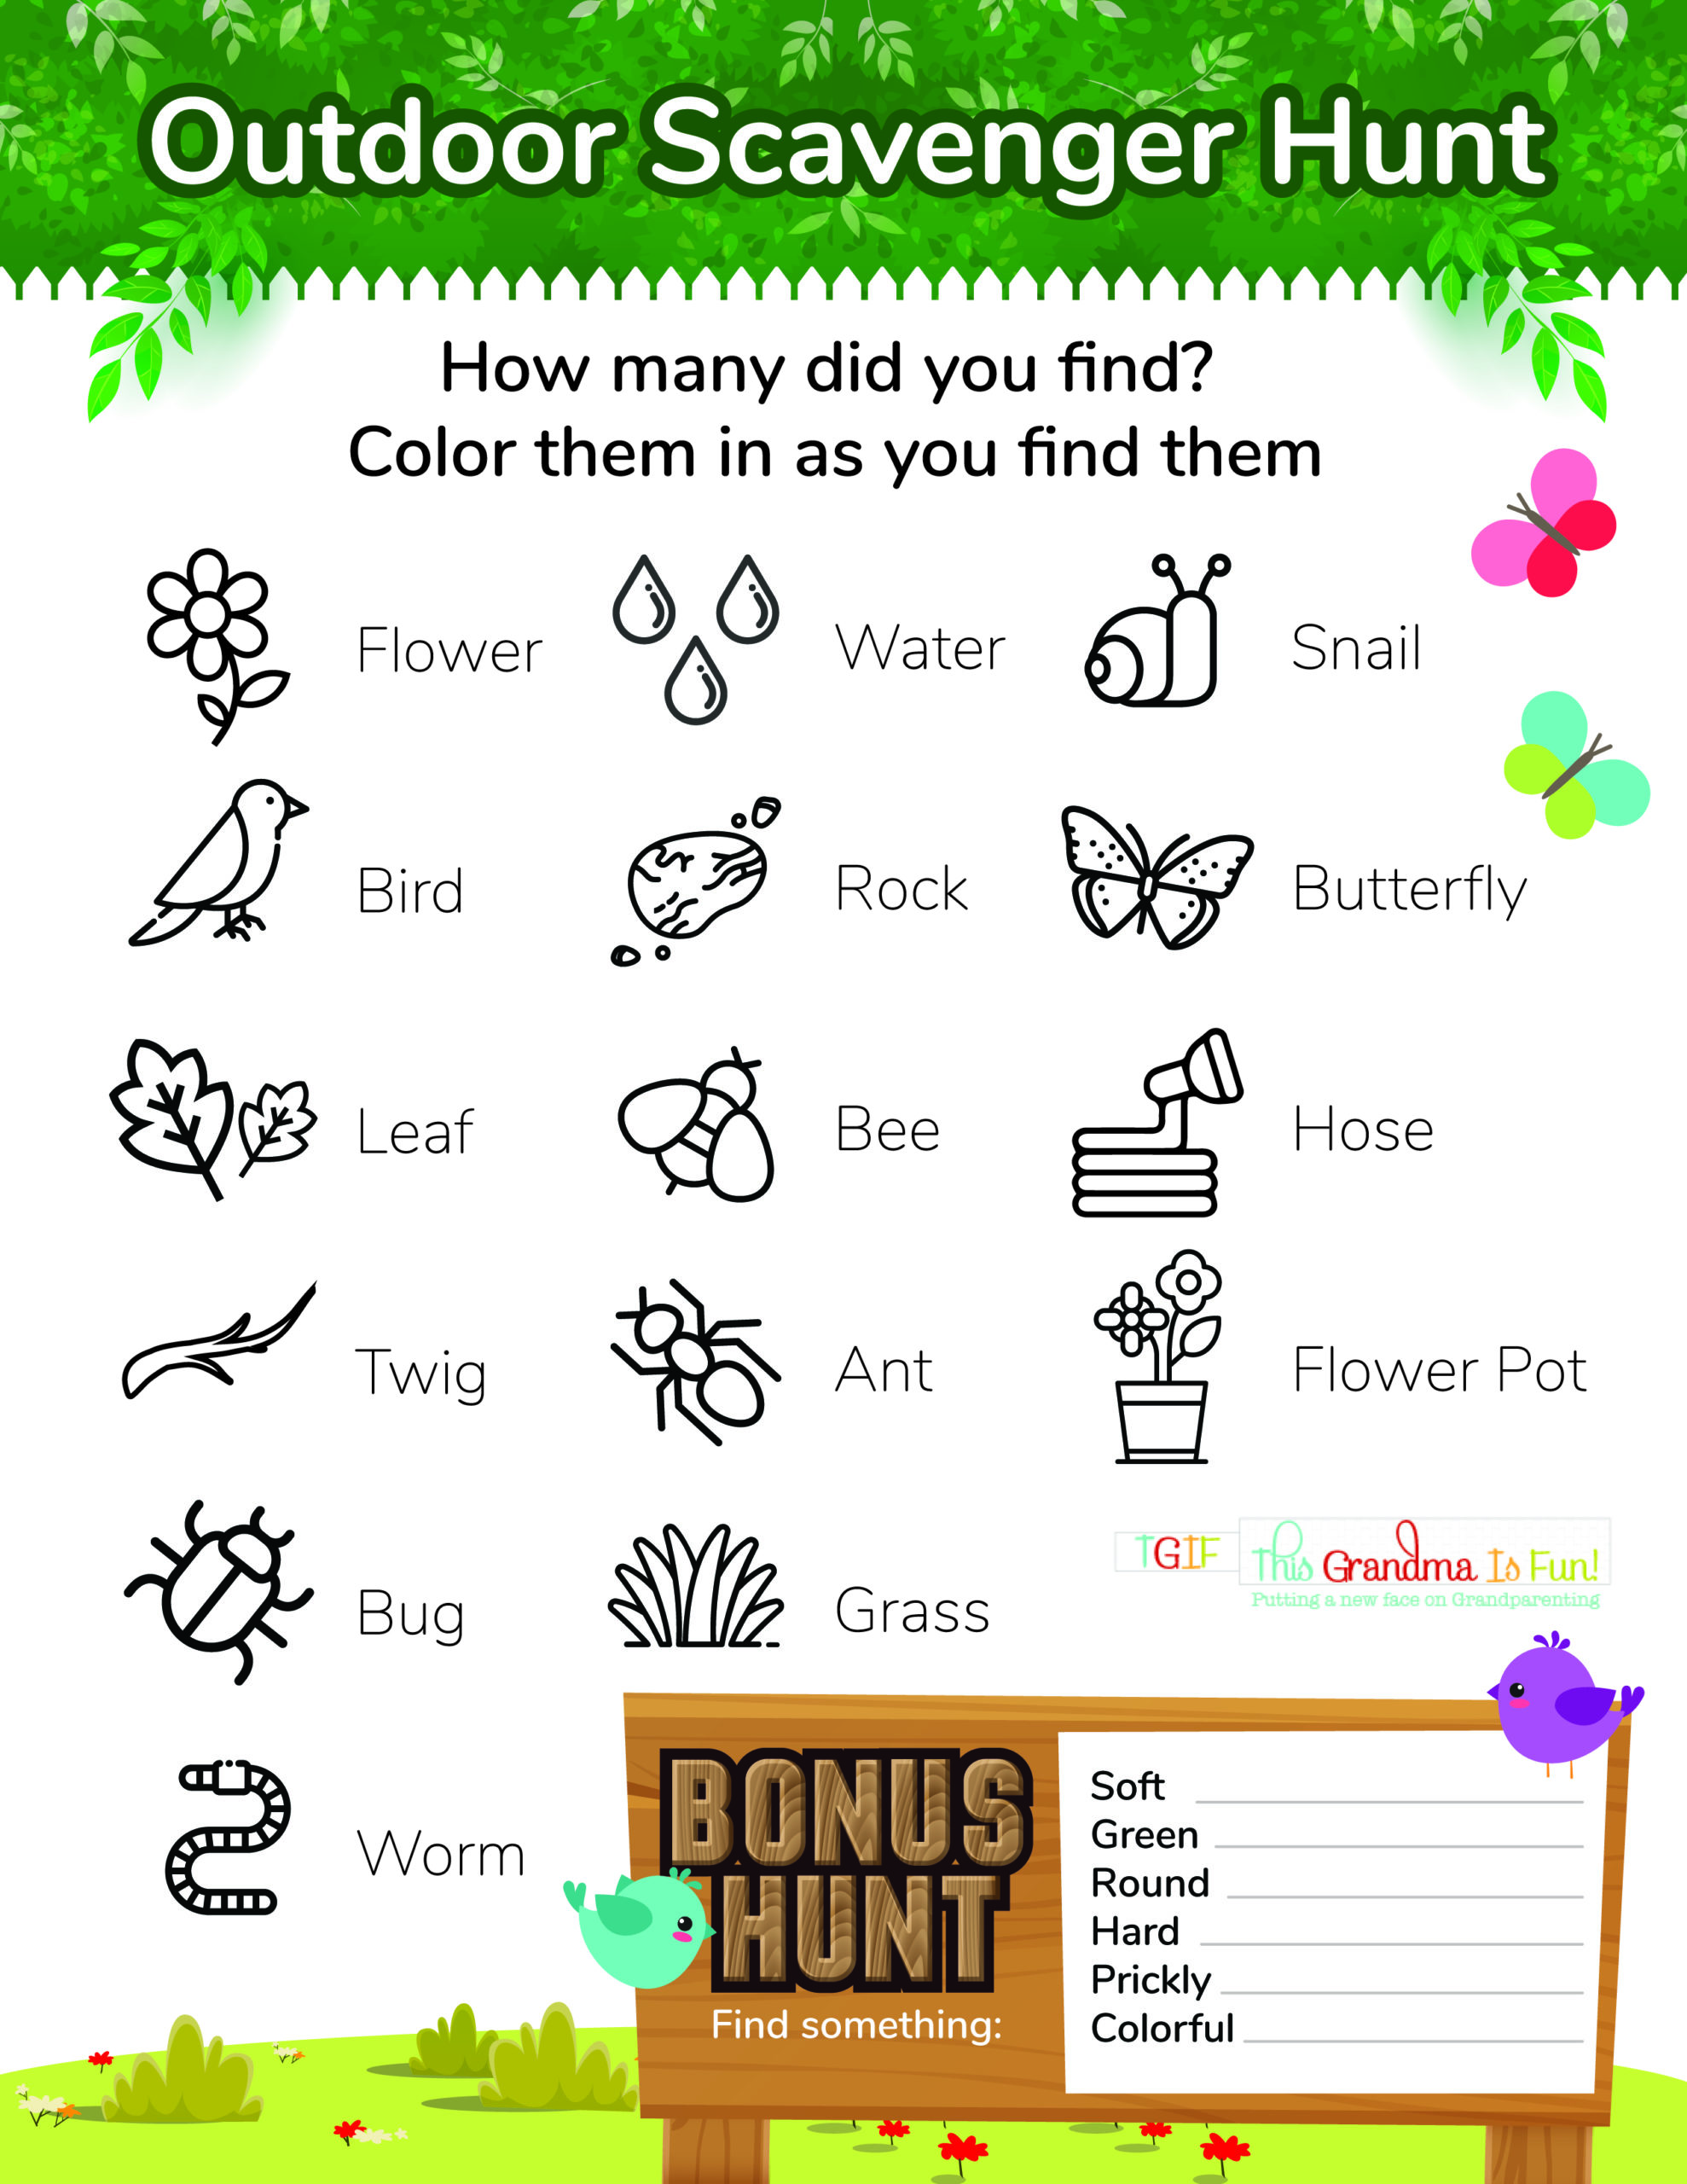 treasure-hunt-games-for-kids-to-download-and-print-ready-for-use